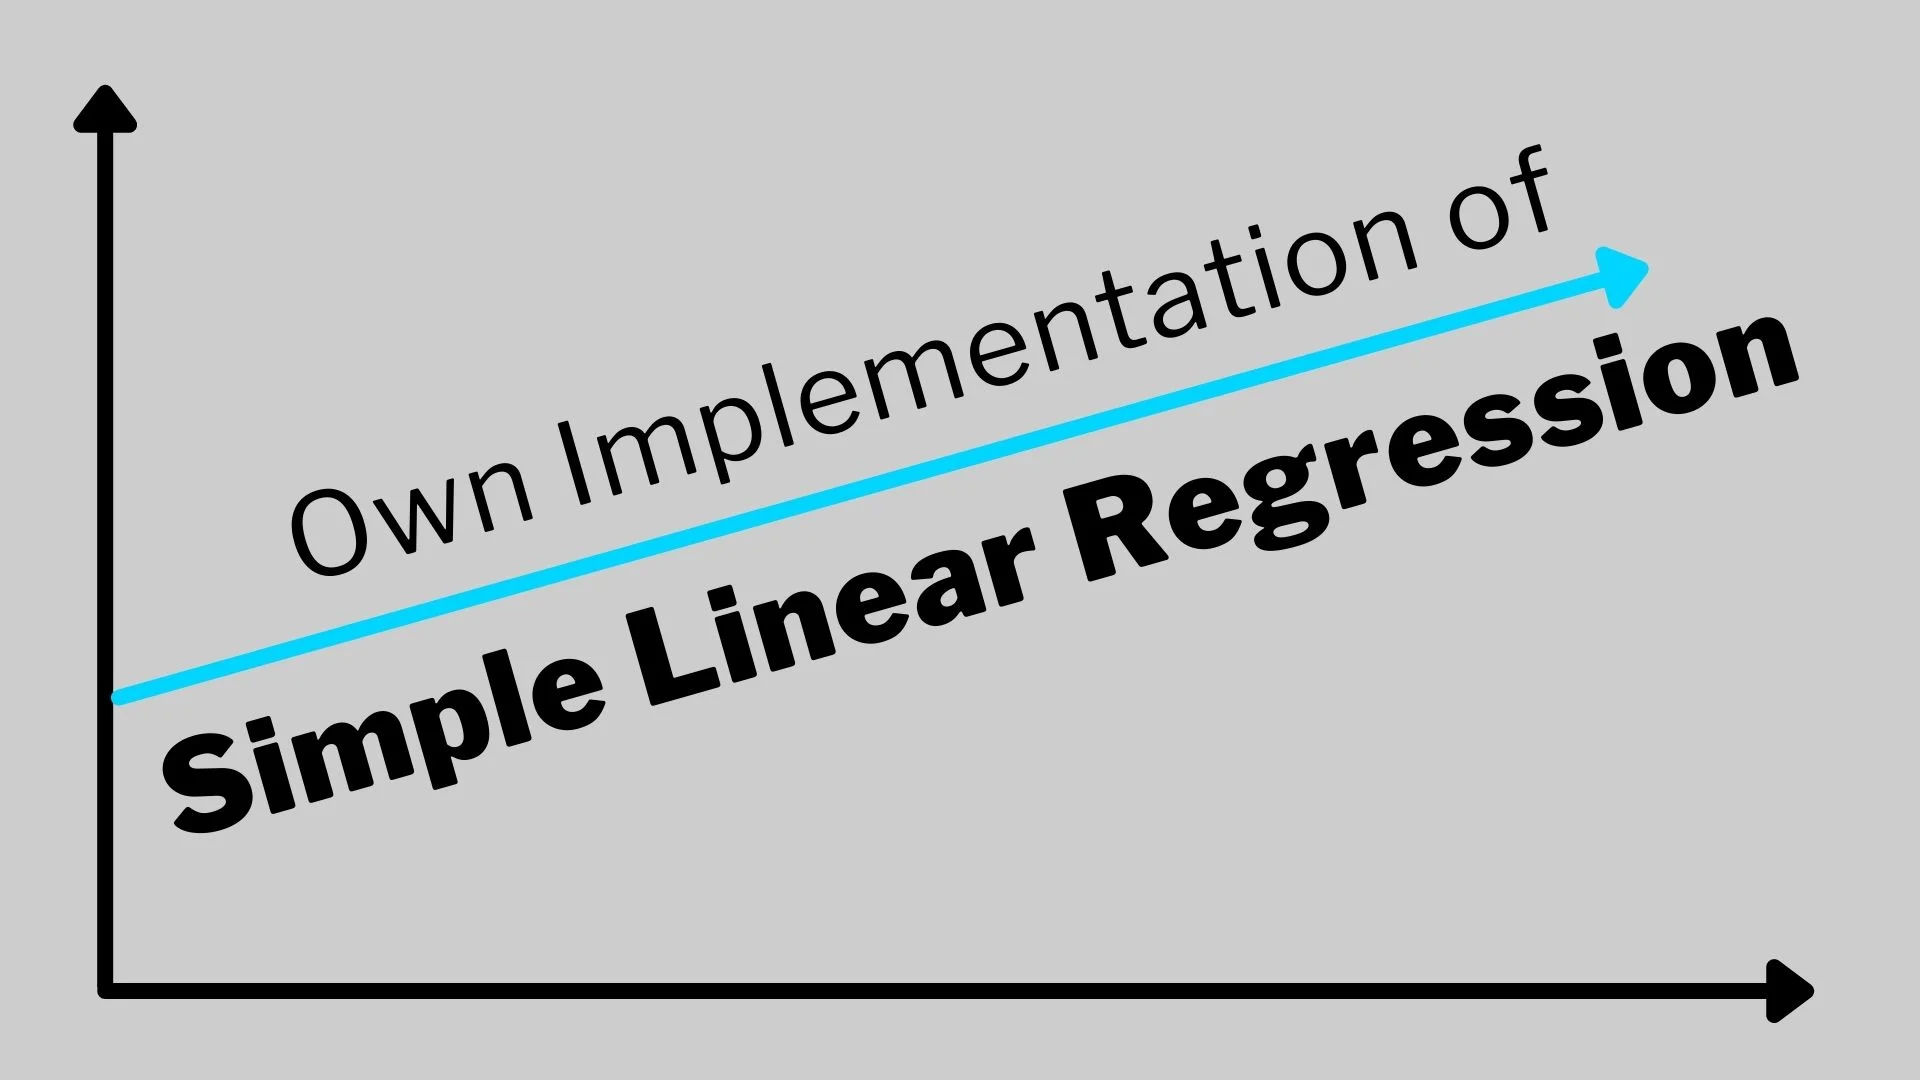 own implementation of simple linear regression